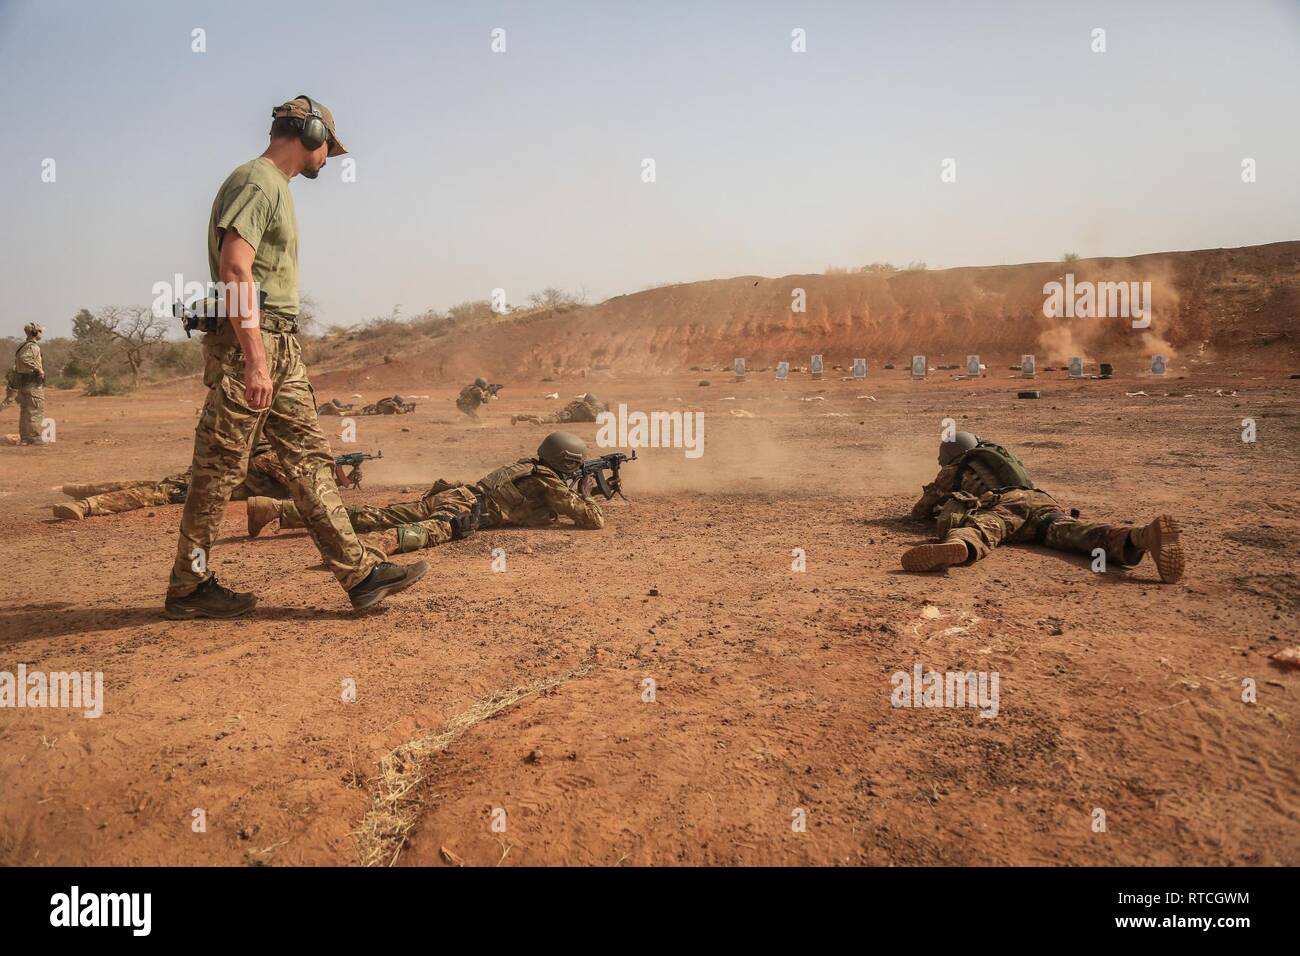 A Czech Special Forces Soldier observes Malian soldiers as they fire their AK-47 rifles near base camp Loumbila, in Burkina Faso on Feb. 19, 2019. The training event is part of exercise Flintlock 2019 and enhances the Malian Soldiers proficiency with their weapons and battle movements. Flintlock is U.S. Africa Command's premier special operations forces exercise in Africa. Stock Photo